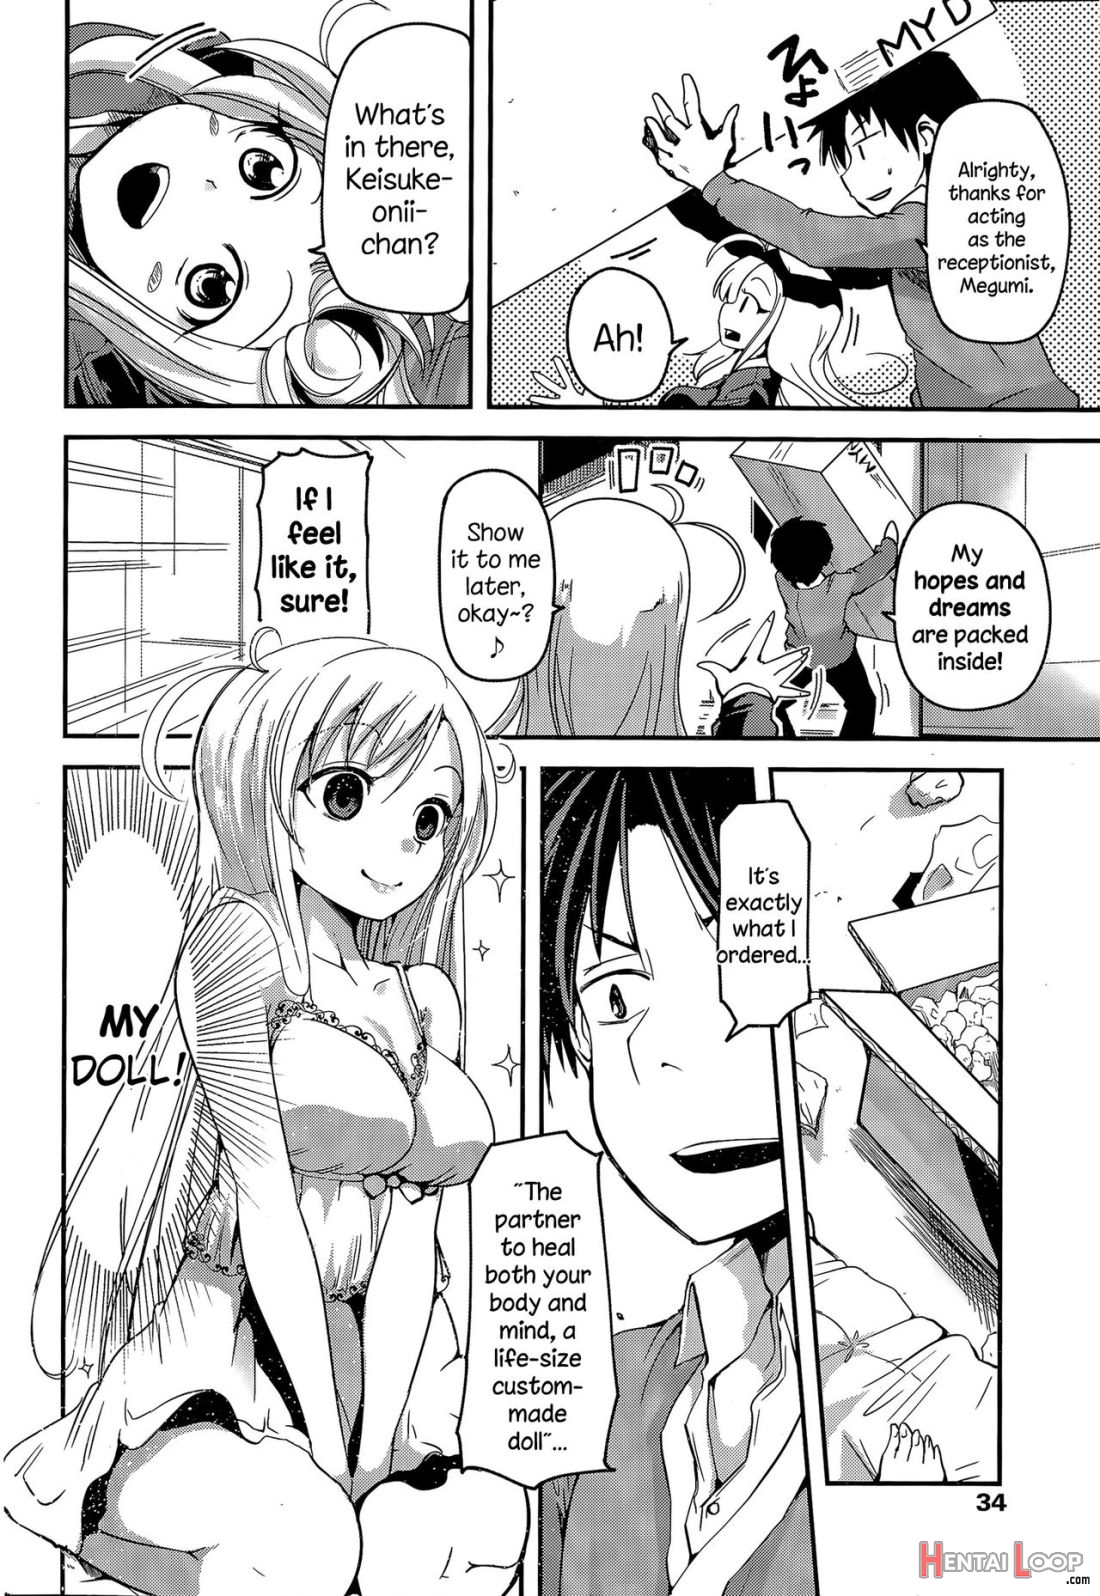 My (imouto) Doll page 2